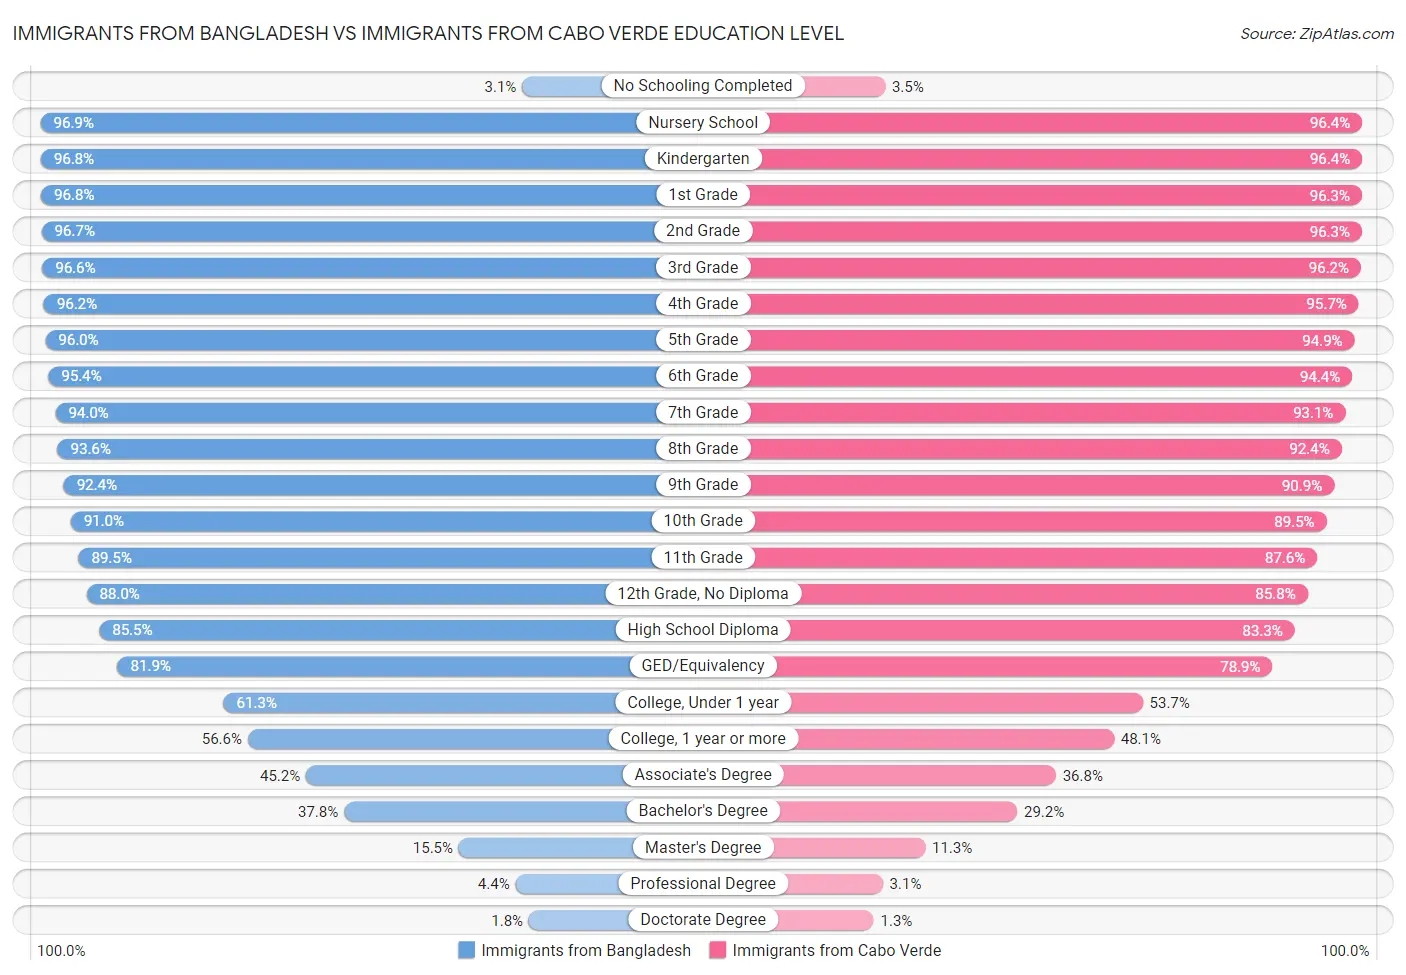 Immigrants from Bangladesh vs Immigrants from Cabo Verde Education Level